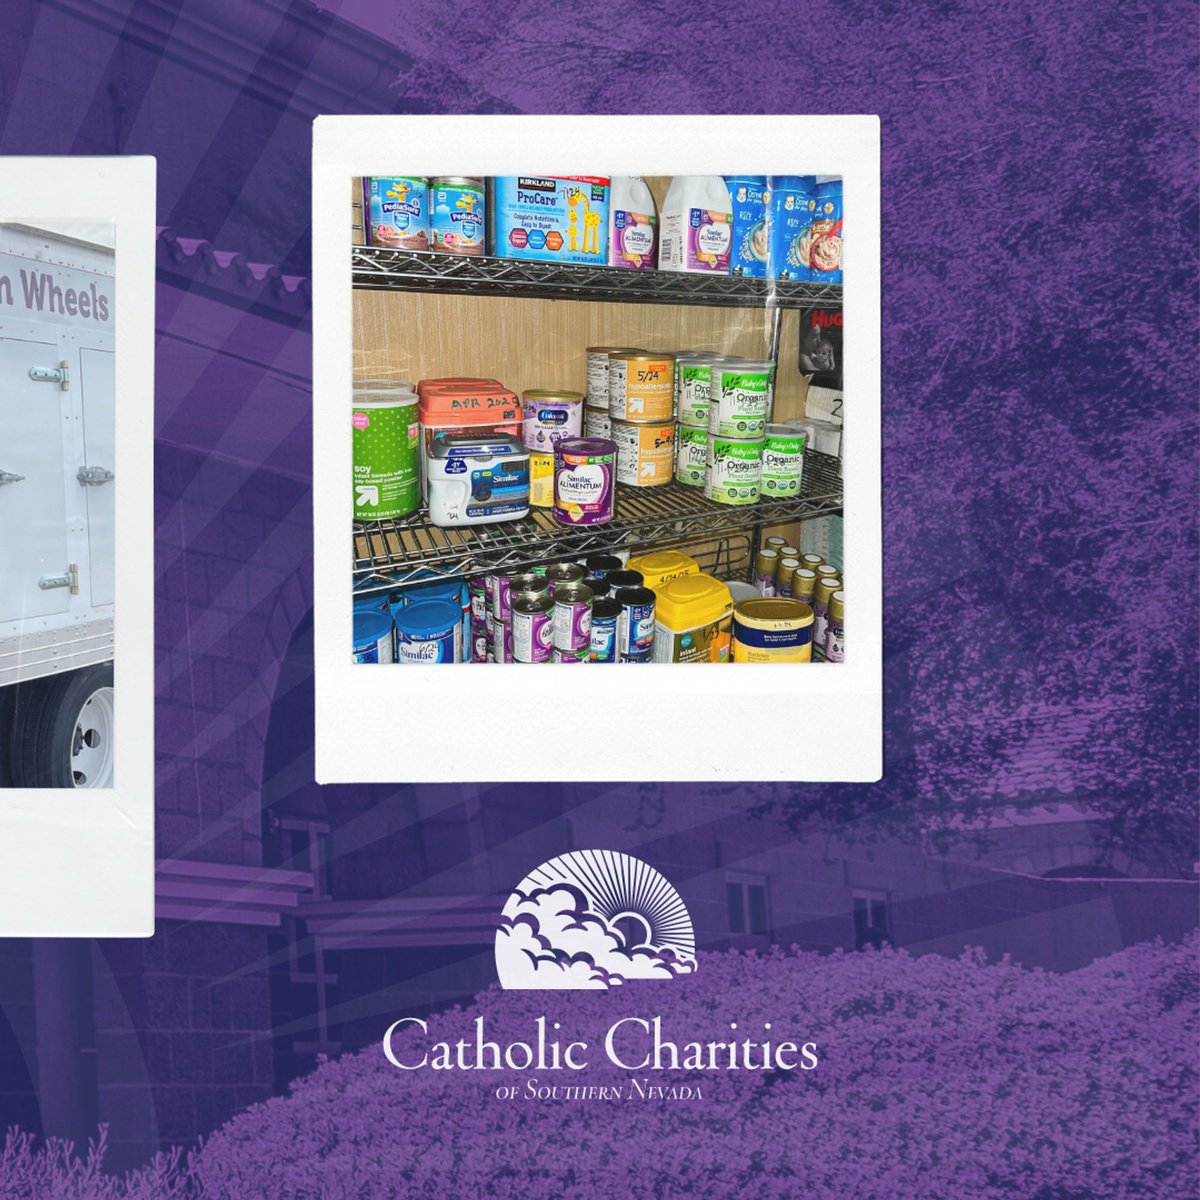 To everyone who donates, volunteers, or works alongside our incredible team at Catholic Charities of Southern Nevada, your commitment to compassion is truly inspiring. 💜✨ #ThankYou #Appreciation #CatholicCharities #SouthernNevada #DonationsAppreciated #VolunteerAppreciation